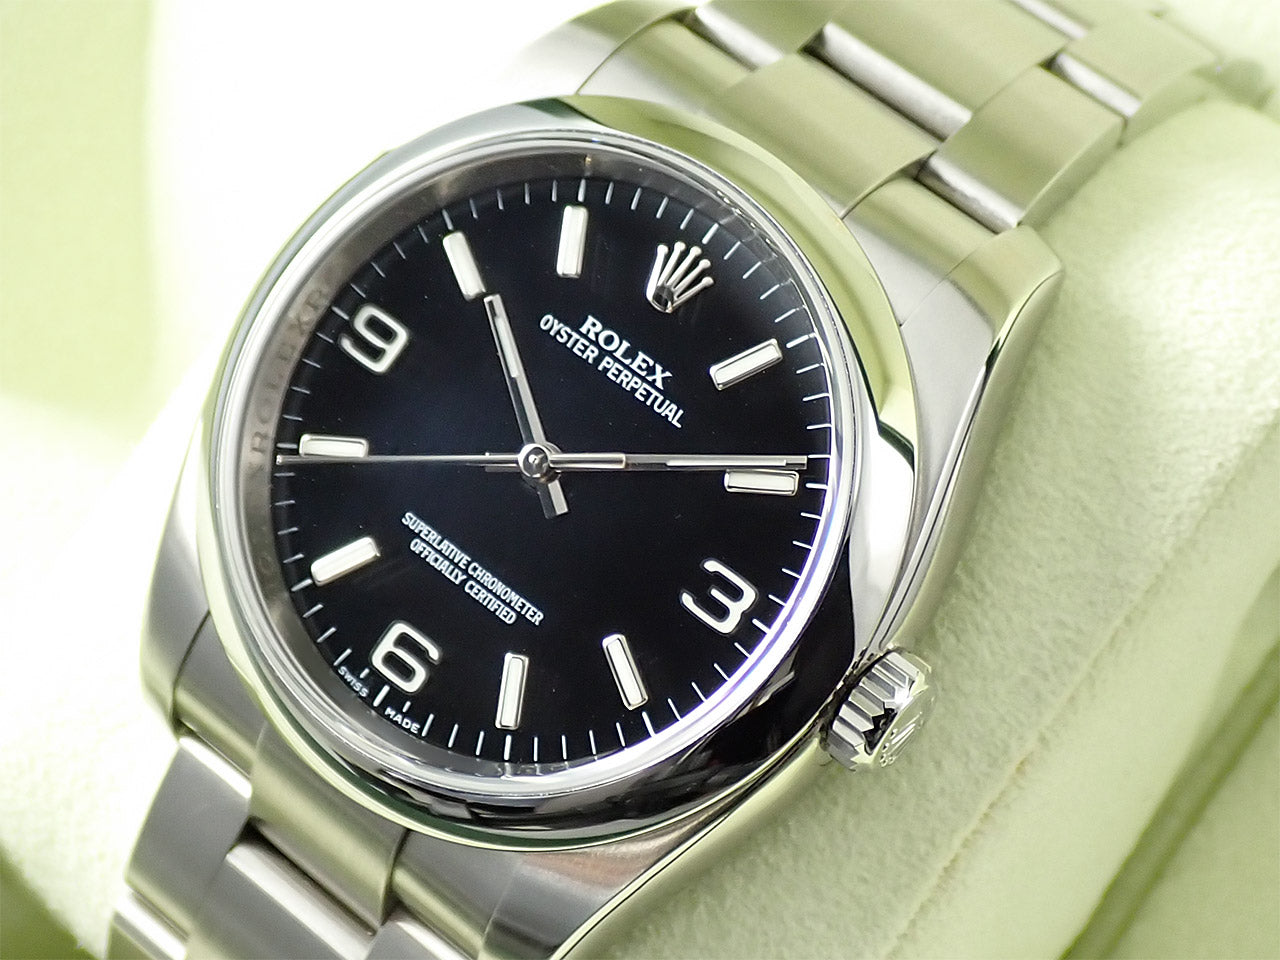 Rolex Oyster Perpetual Japan Limited Edition &lt;Warranty, Box, etc.&gt;